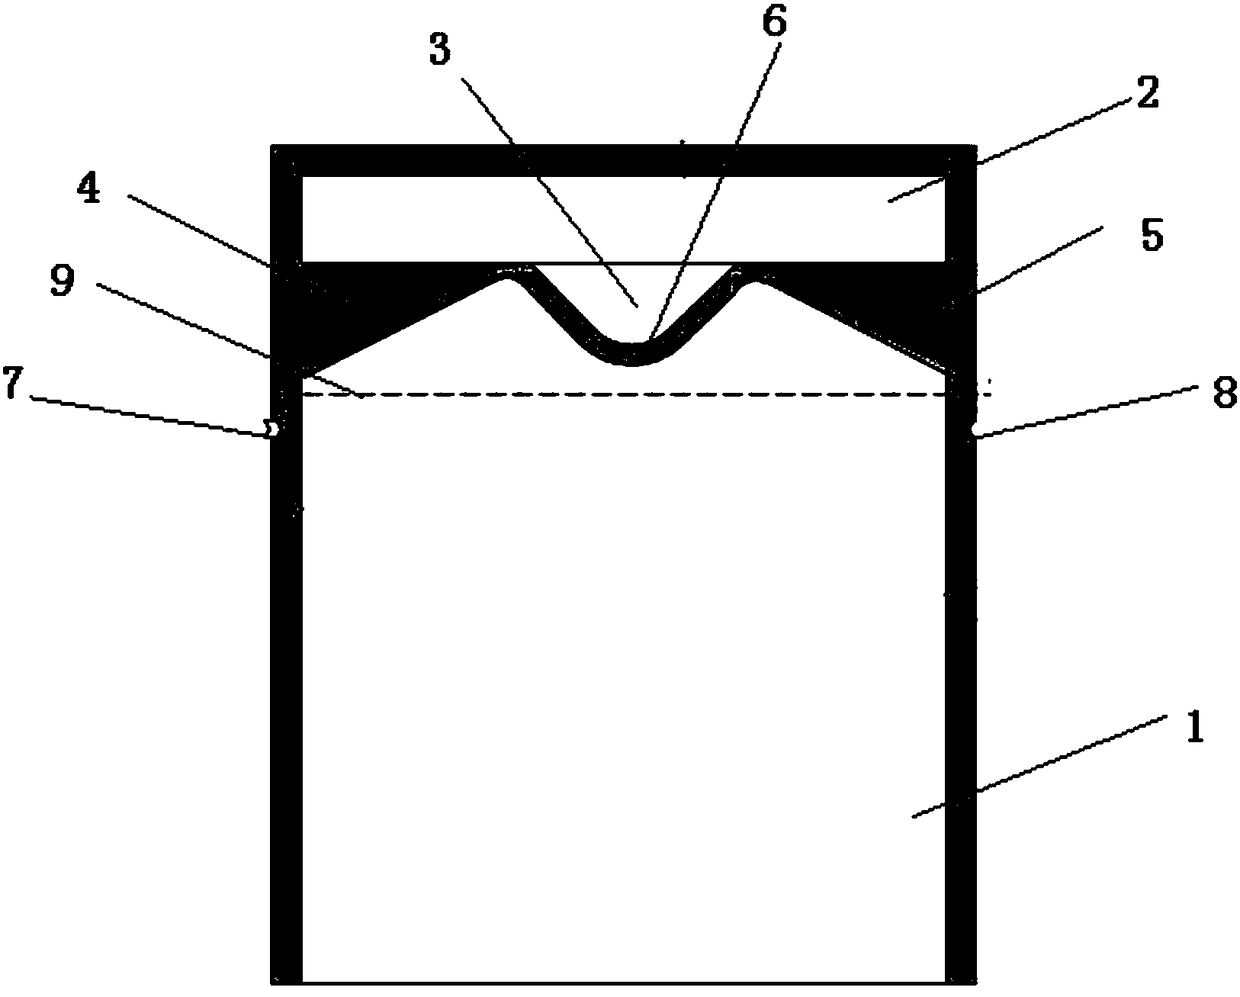 Explosion-proof microwave oven exhaust bag